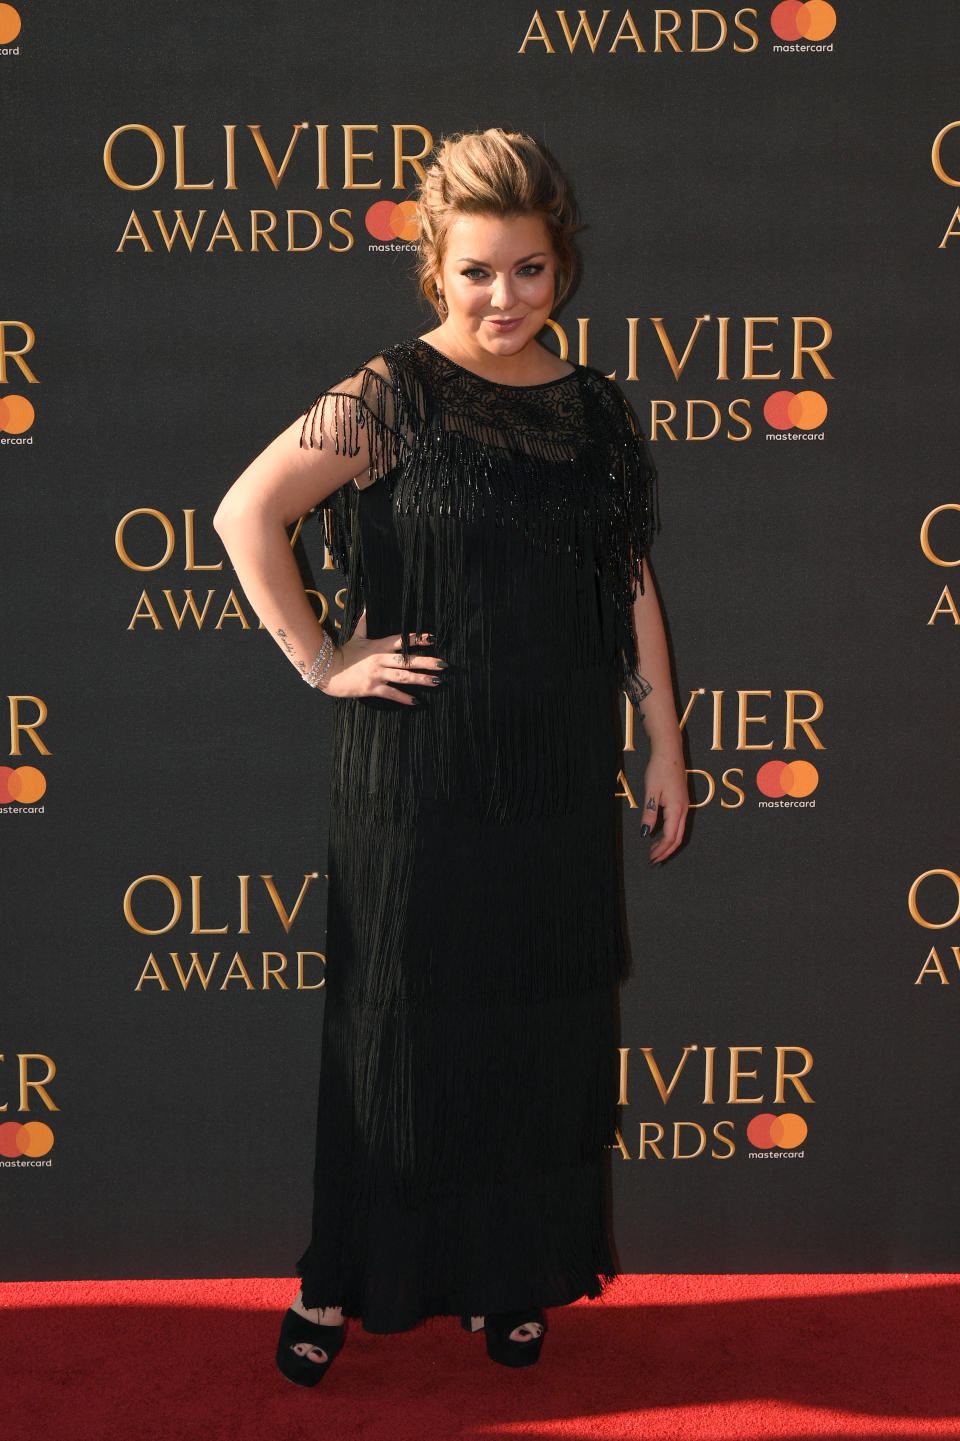 Sheridan Smith attending the Olivier Awards 2017, held at the Royal Albert Hall in London.